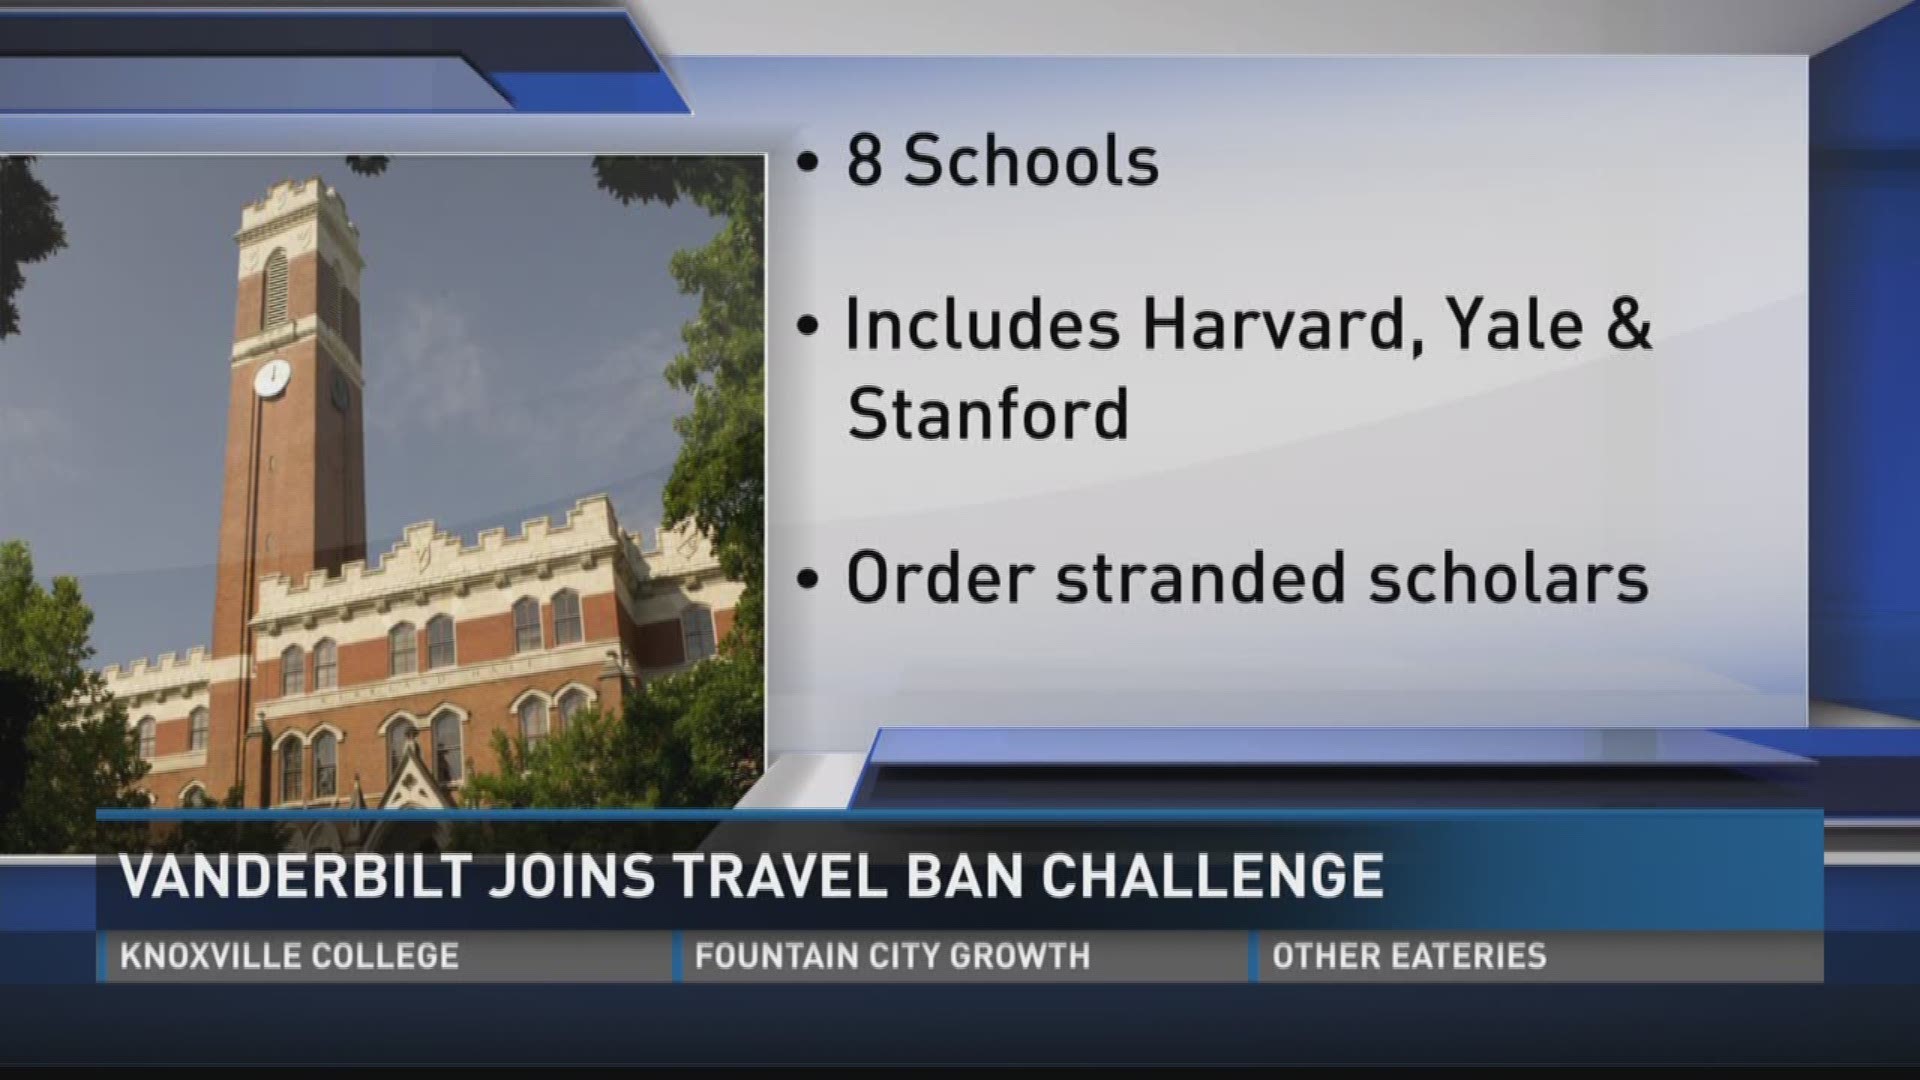 Feb. 13, 2017: Vanderbilt University has joined some of the nation's top universities in a challenge to President Donald Trump's travel ban.